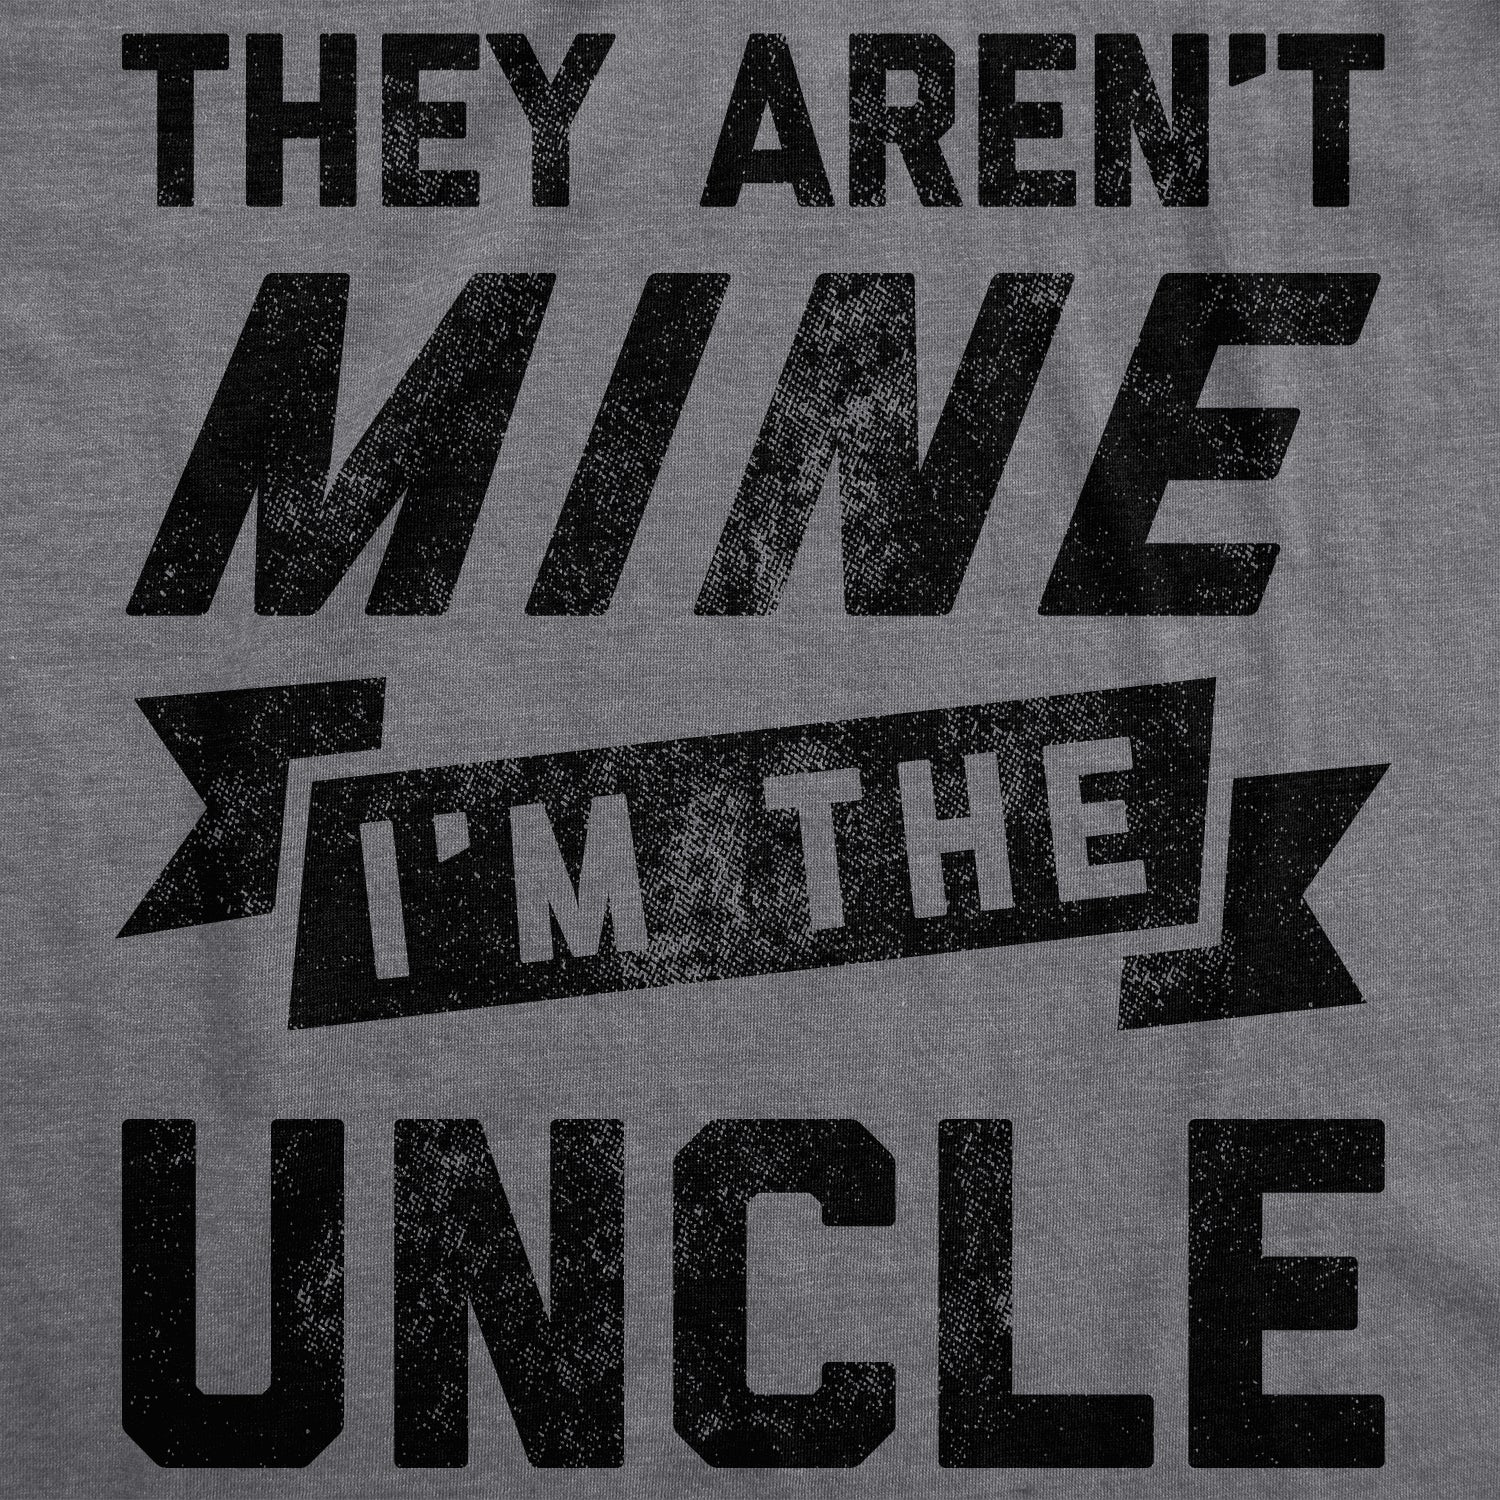 Funny Dark Heather Grey - They Aren't Mine They Aren't Mine I'm The Uncle Mens T Shirt Nerdy Uncle Tee